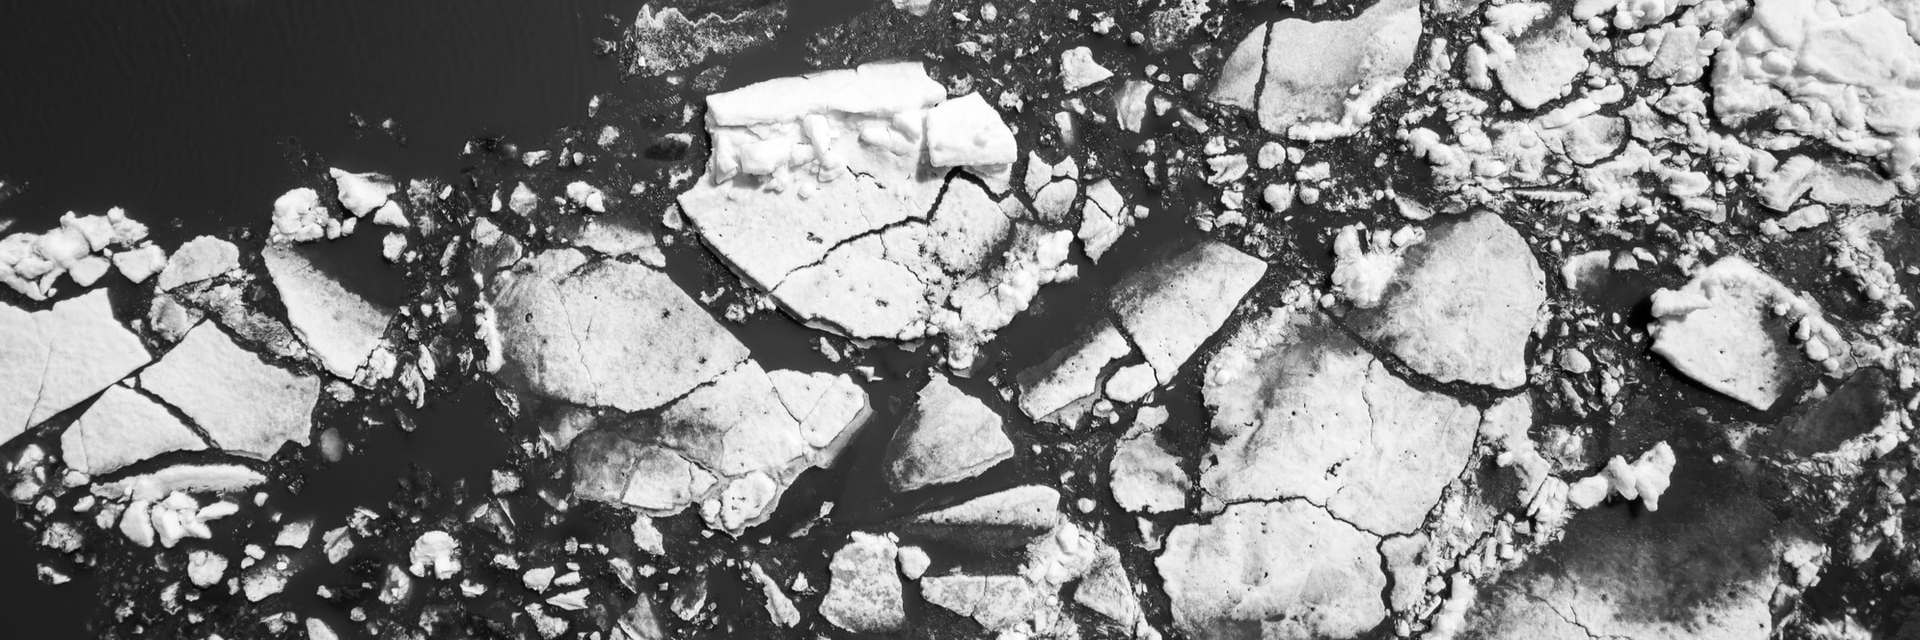 A black and white image of light fractured stone pieces on a dark background.